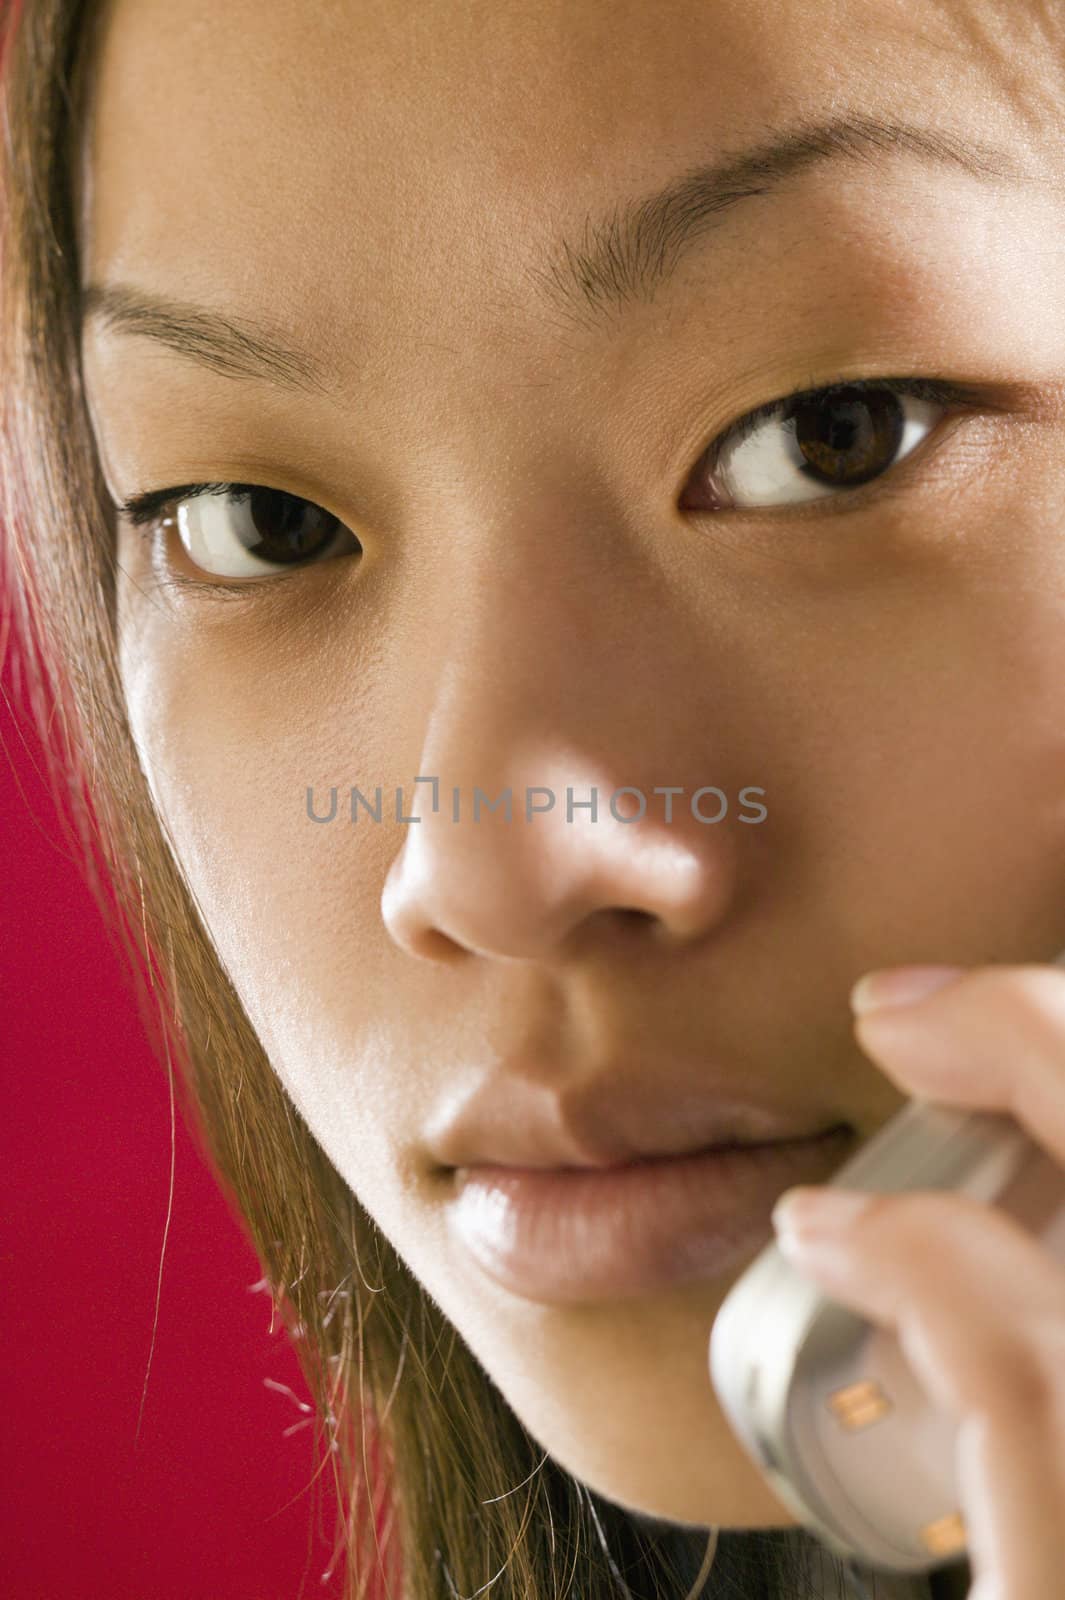 Close up view of a young Asian girl using a cell phone